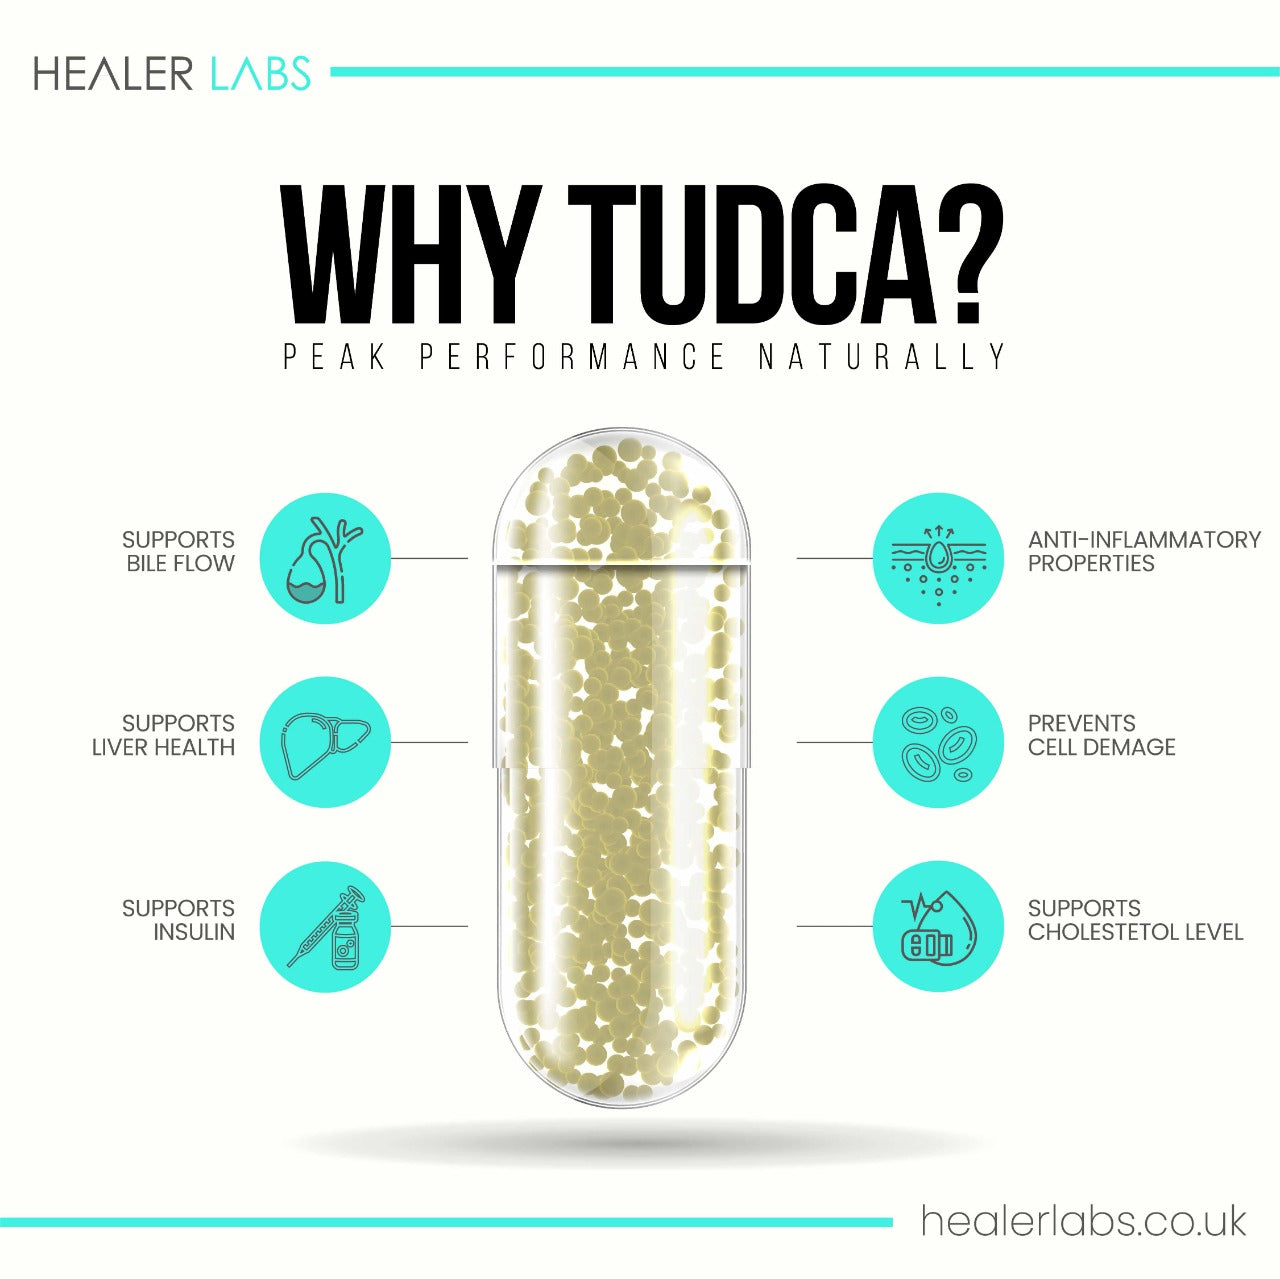  Healer Labs - Liver Detox With Tudca Nac & Milk Thistle - The Beauty Corp.